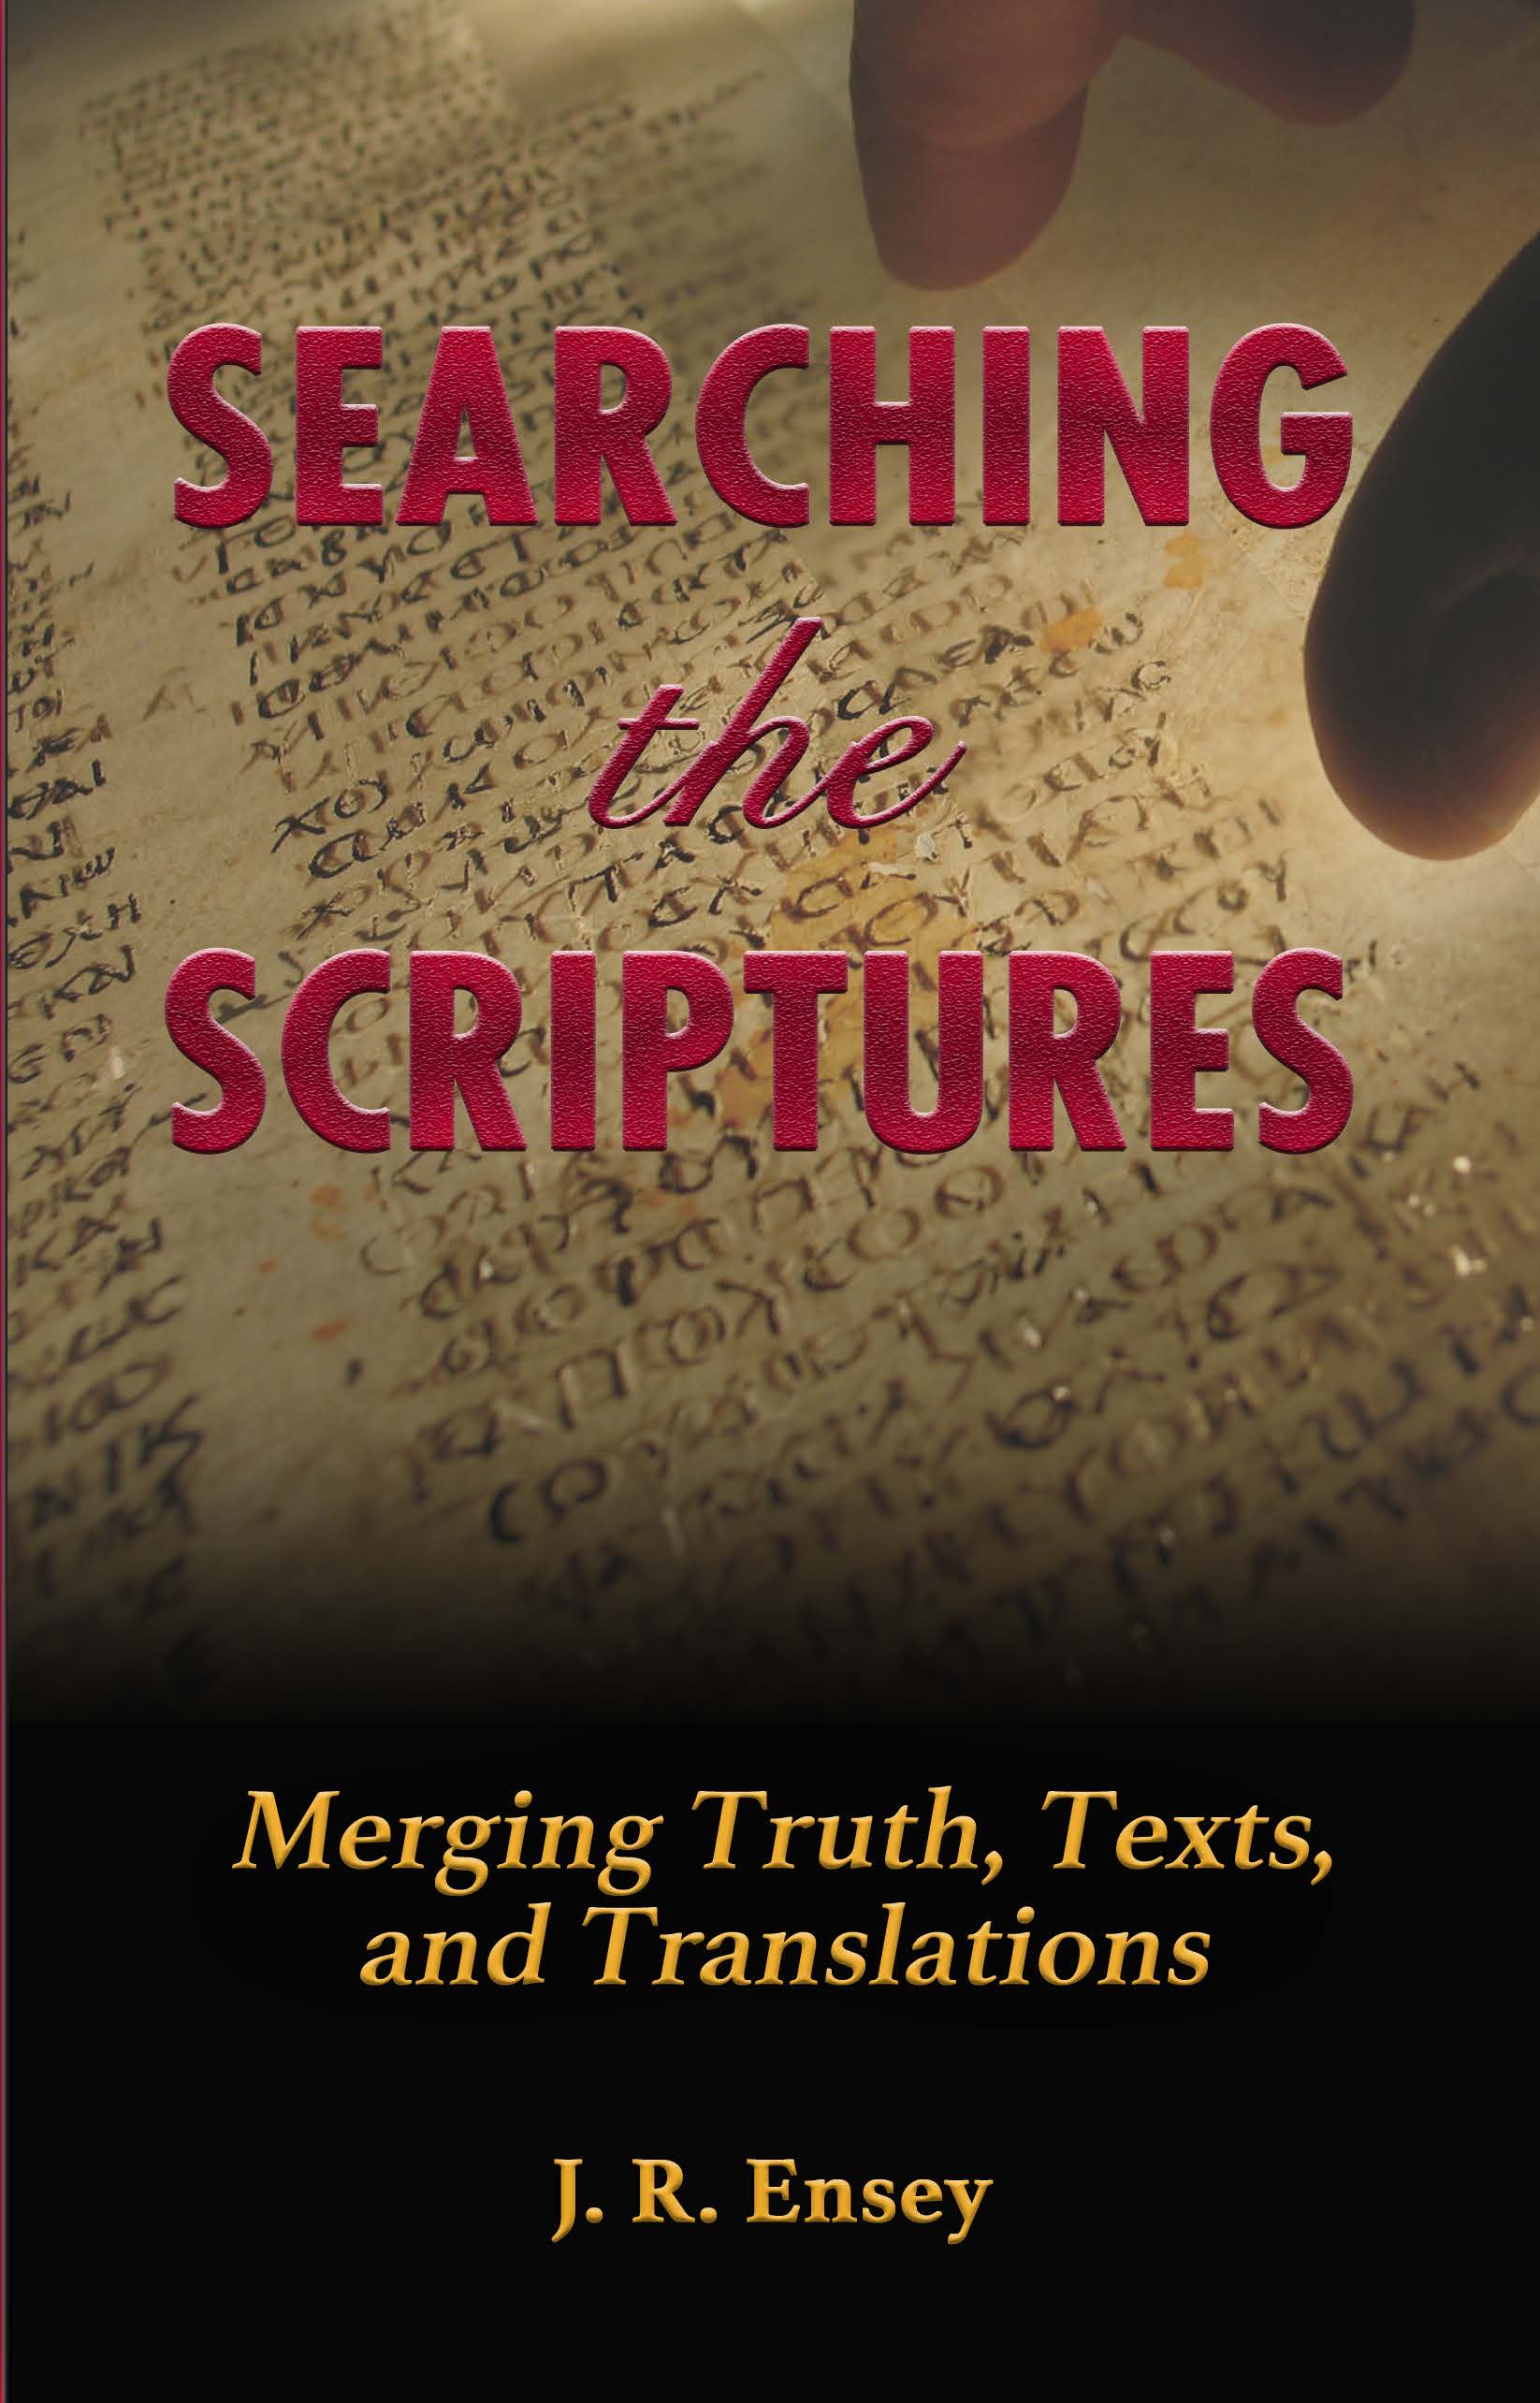 Searching The Scriptures